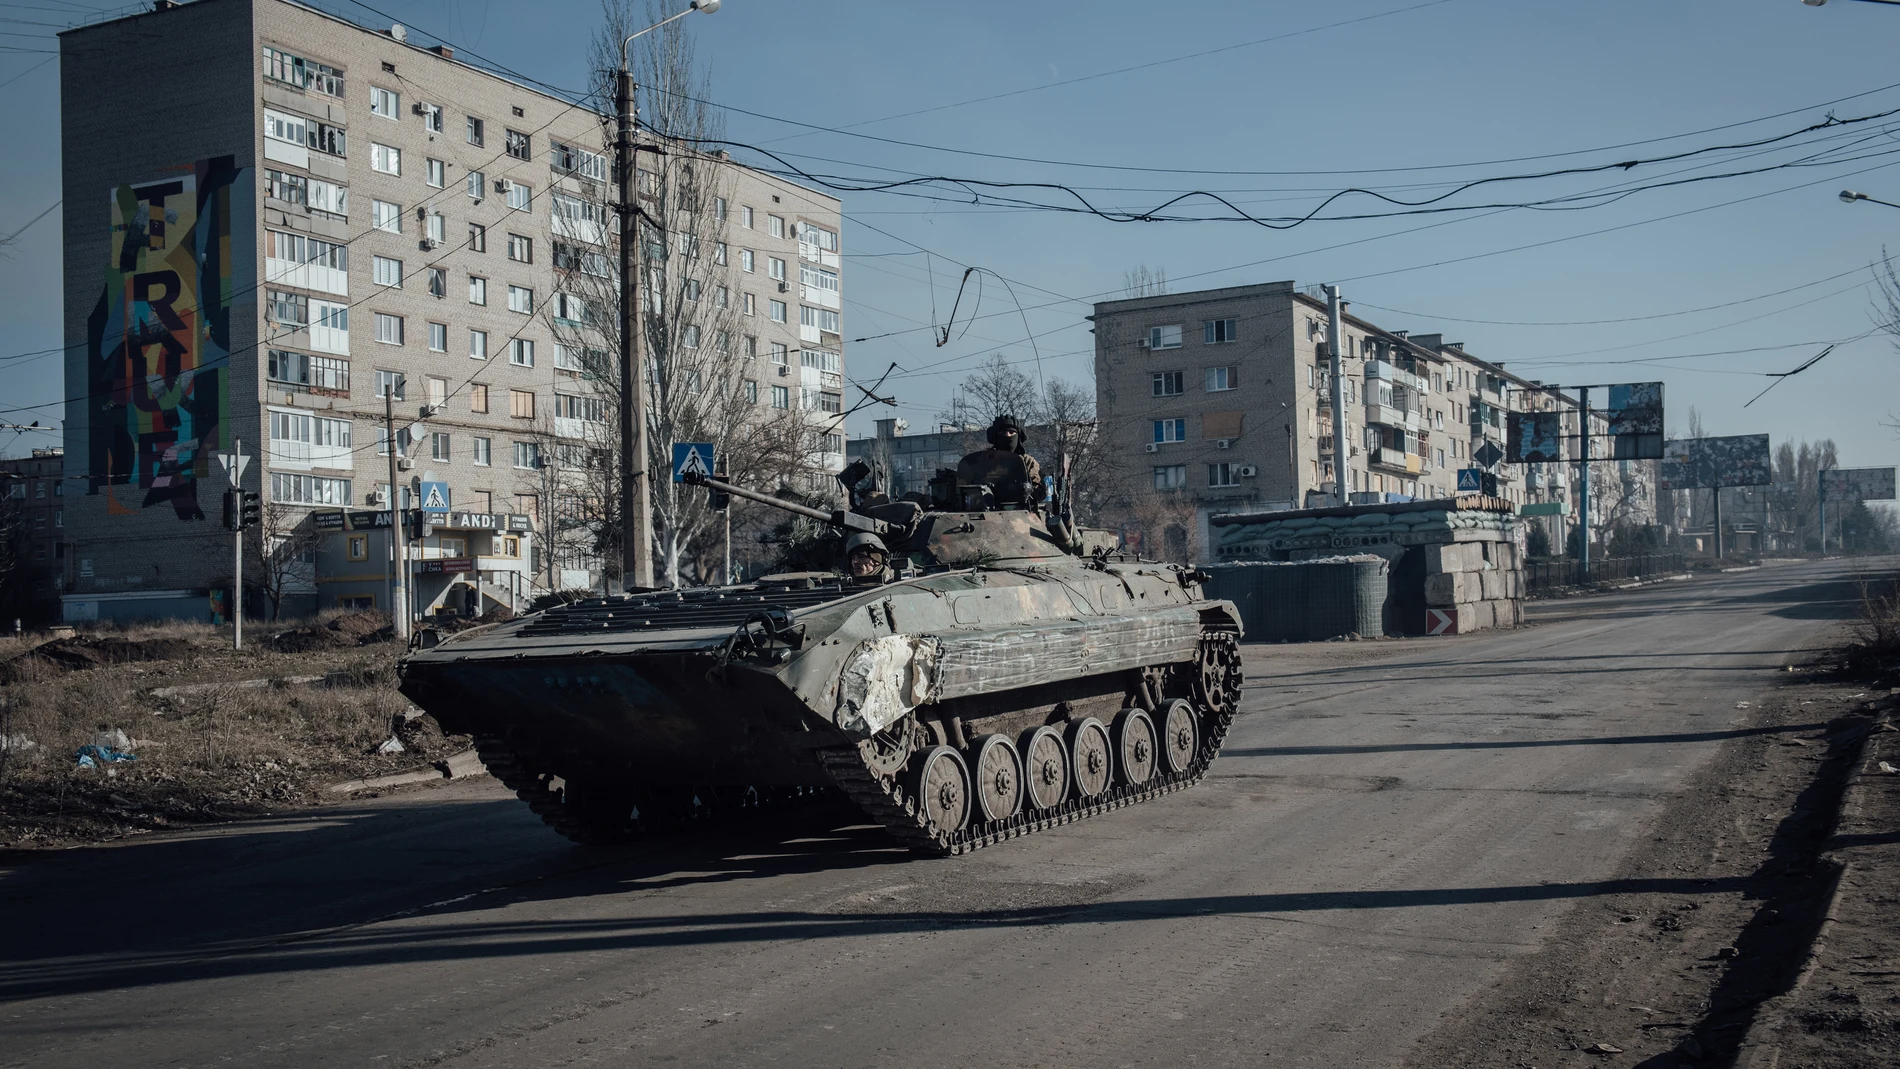 January 27, 2023, Bakhmut, Donbass, Ukraine: A Ukrainian tank passes through the eerily empty streets of Bkahmut during the war with Russia. (Foto de ARCHIVO) 27/01/2023